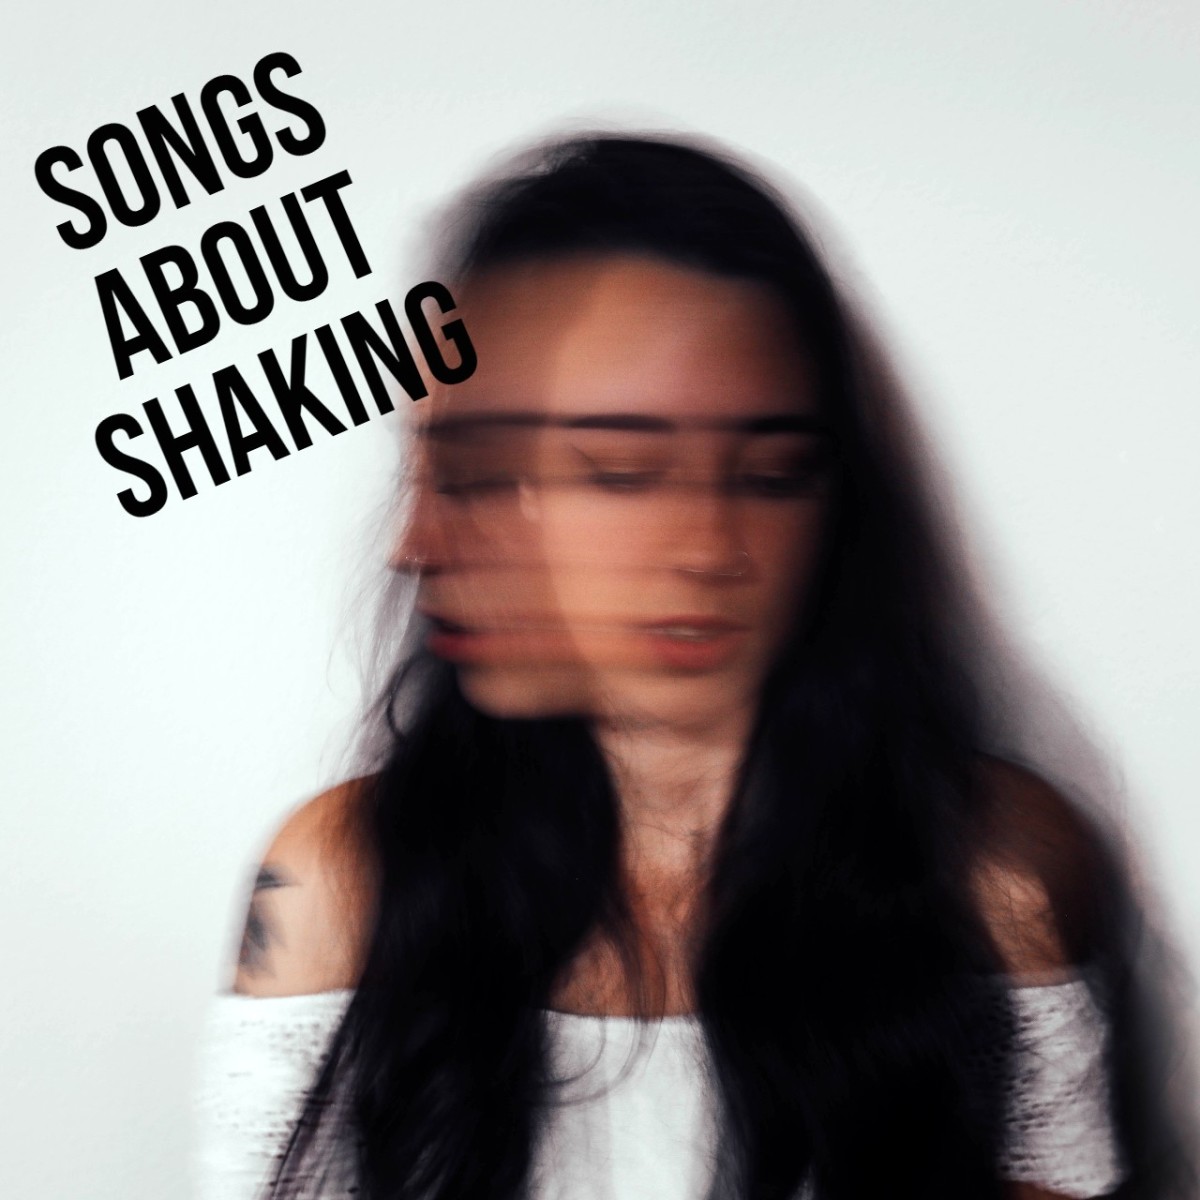 63 Songs About Shaking